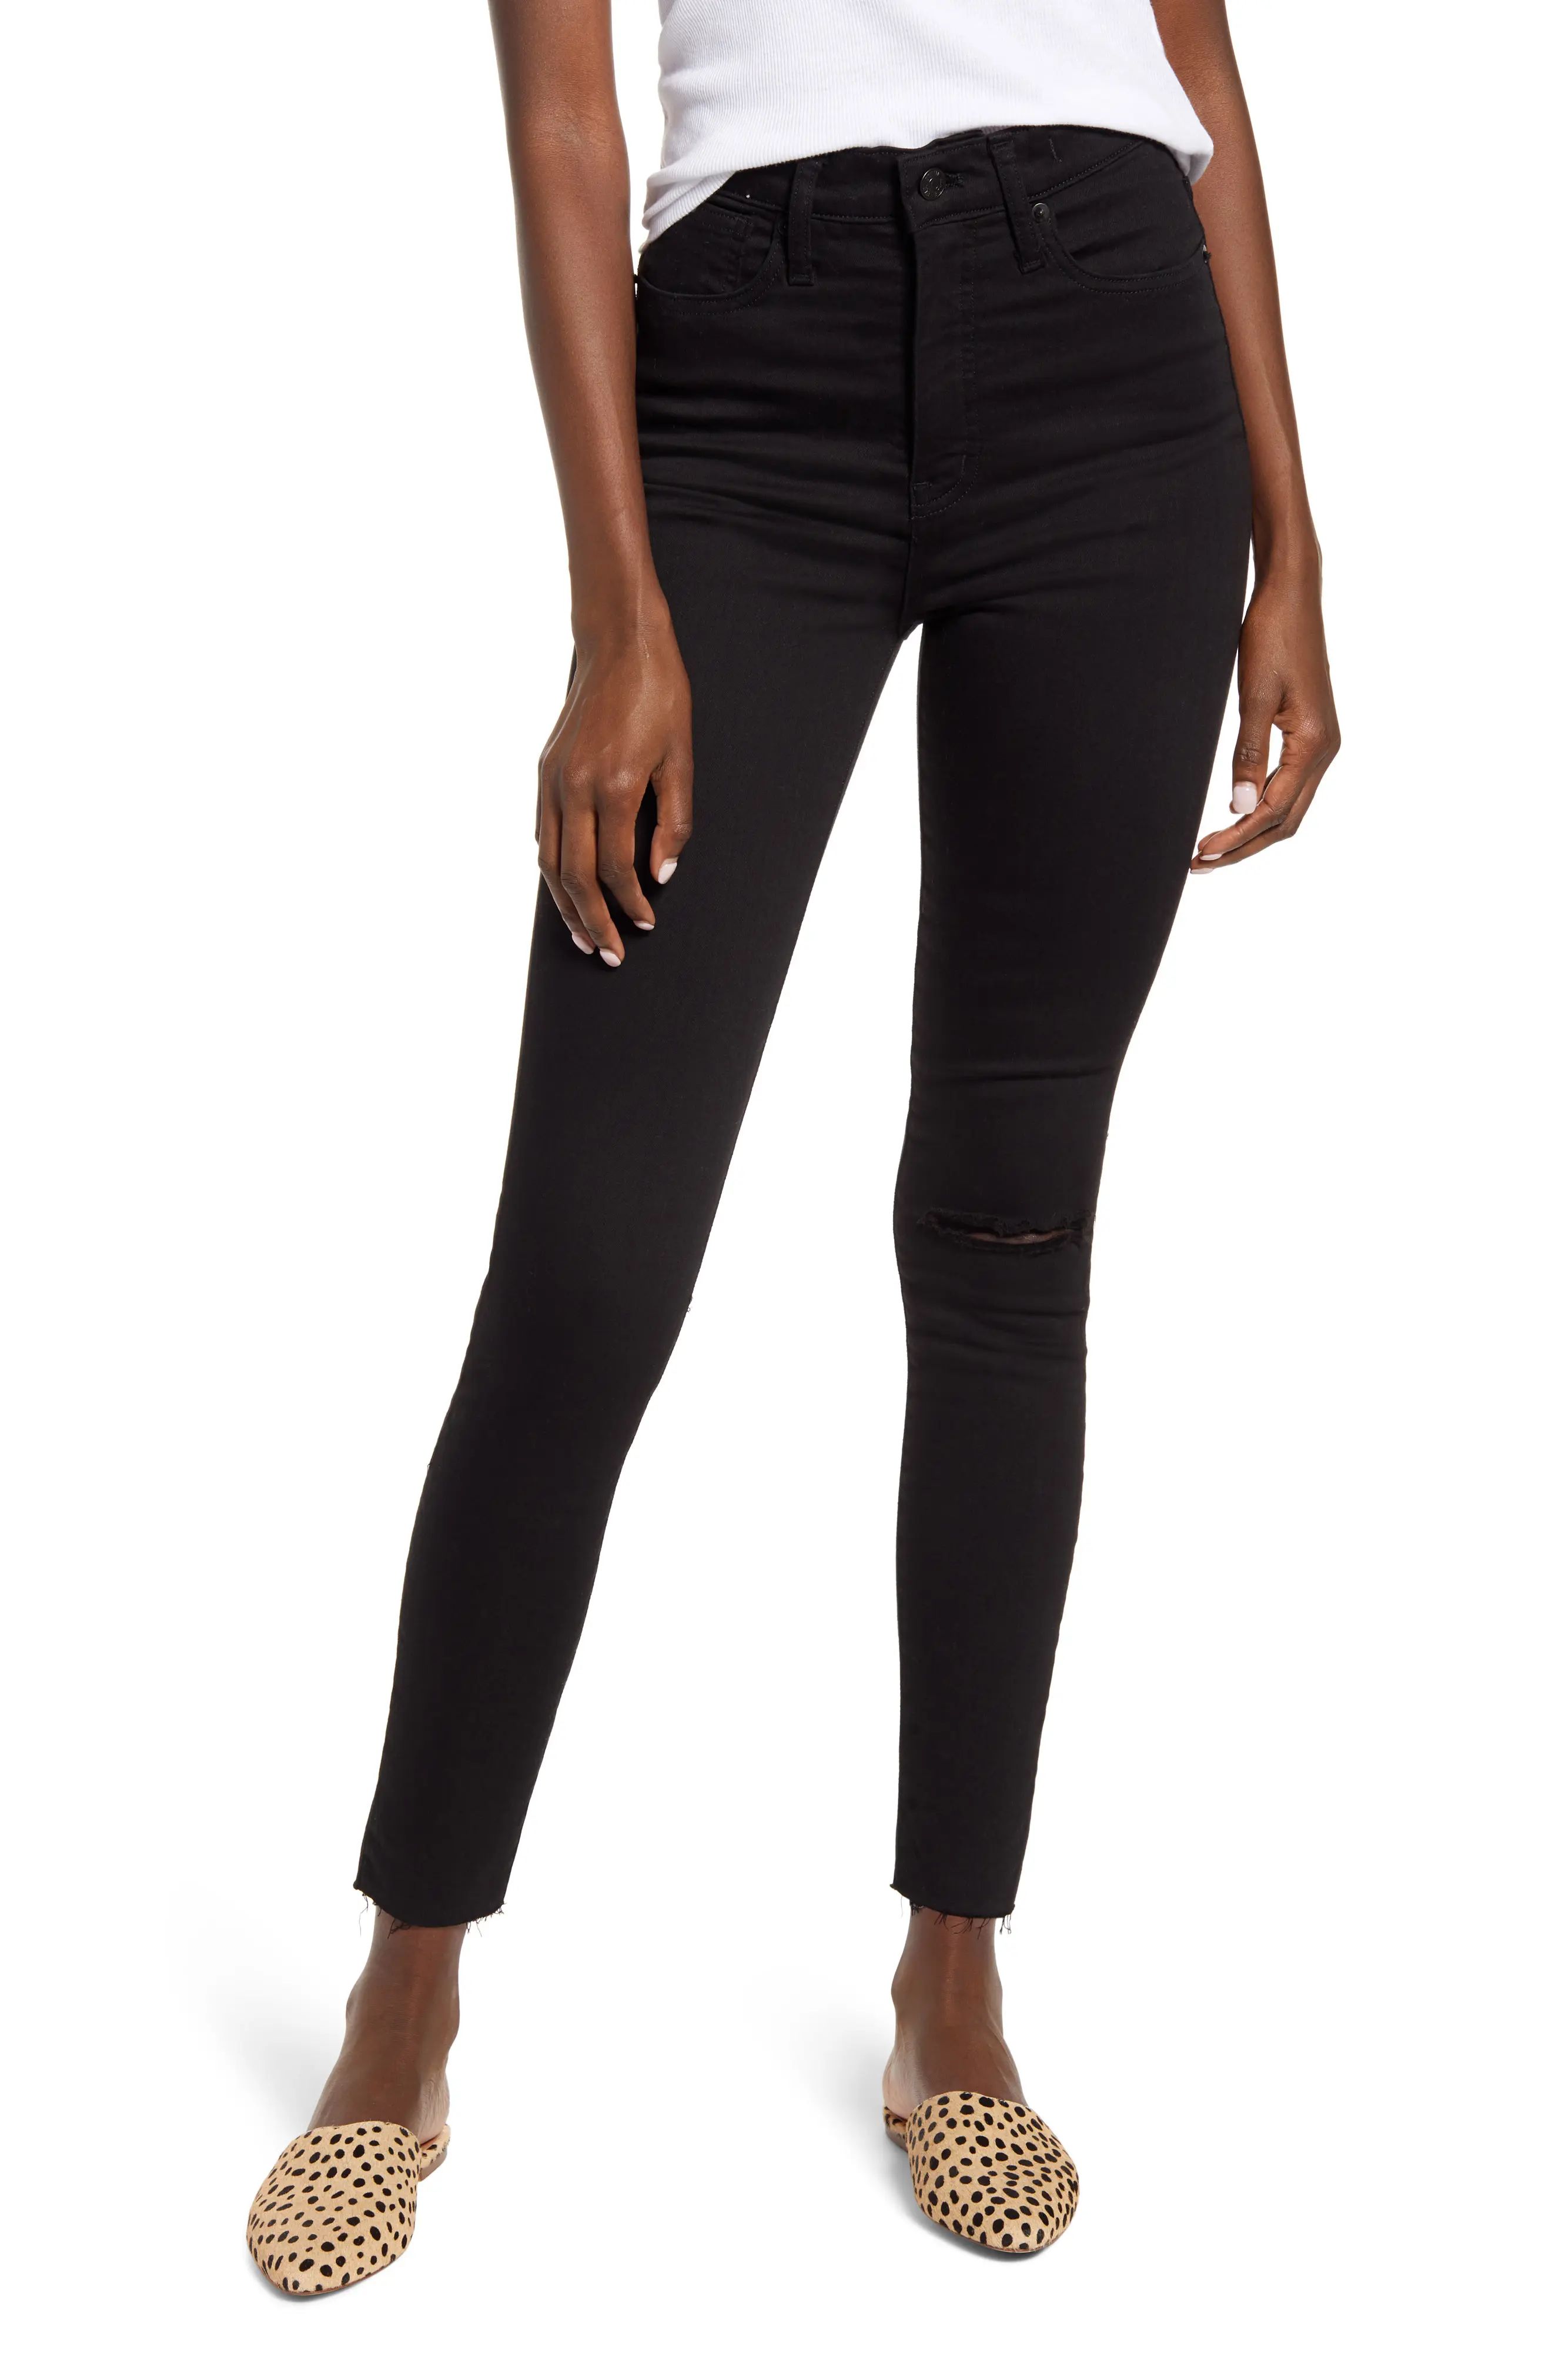 Madewell 11-Inch High-Rise Skinny Jeans, Size 27 in Black Frost at Nordstrom | Nordstrom